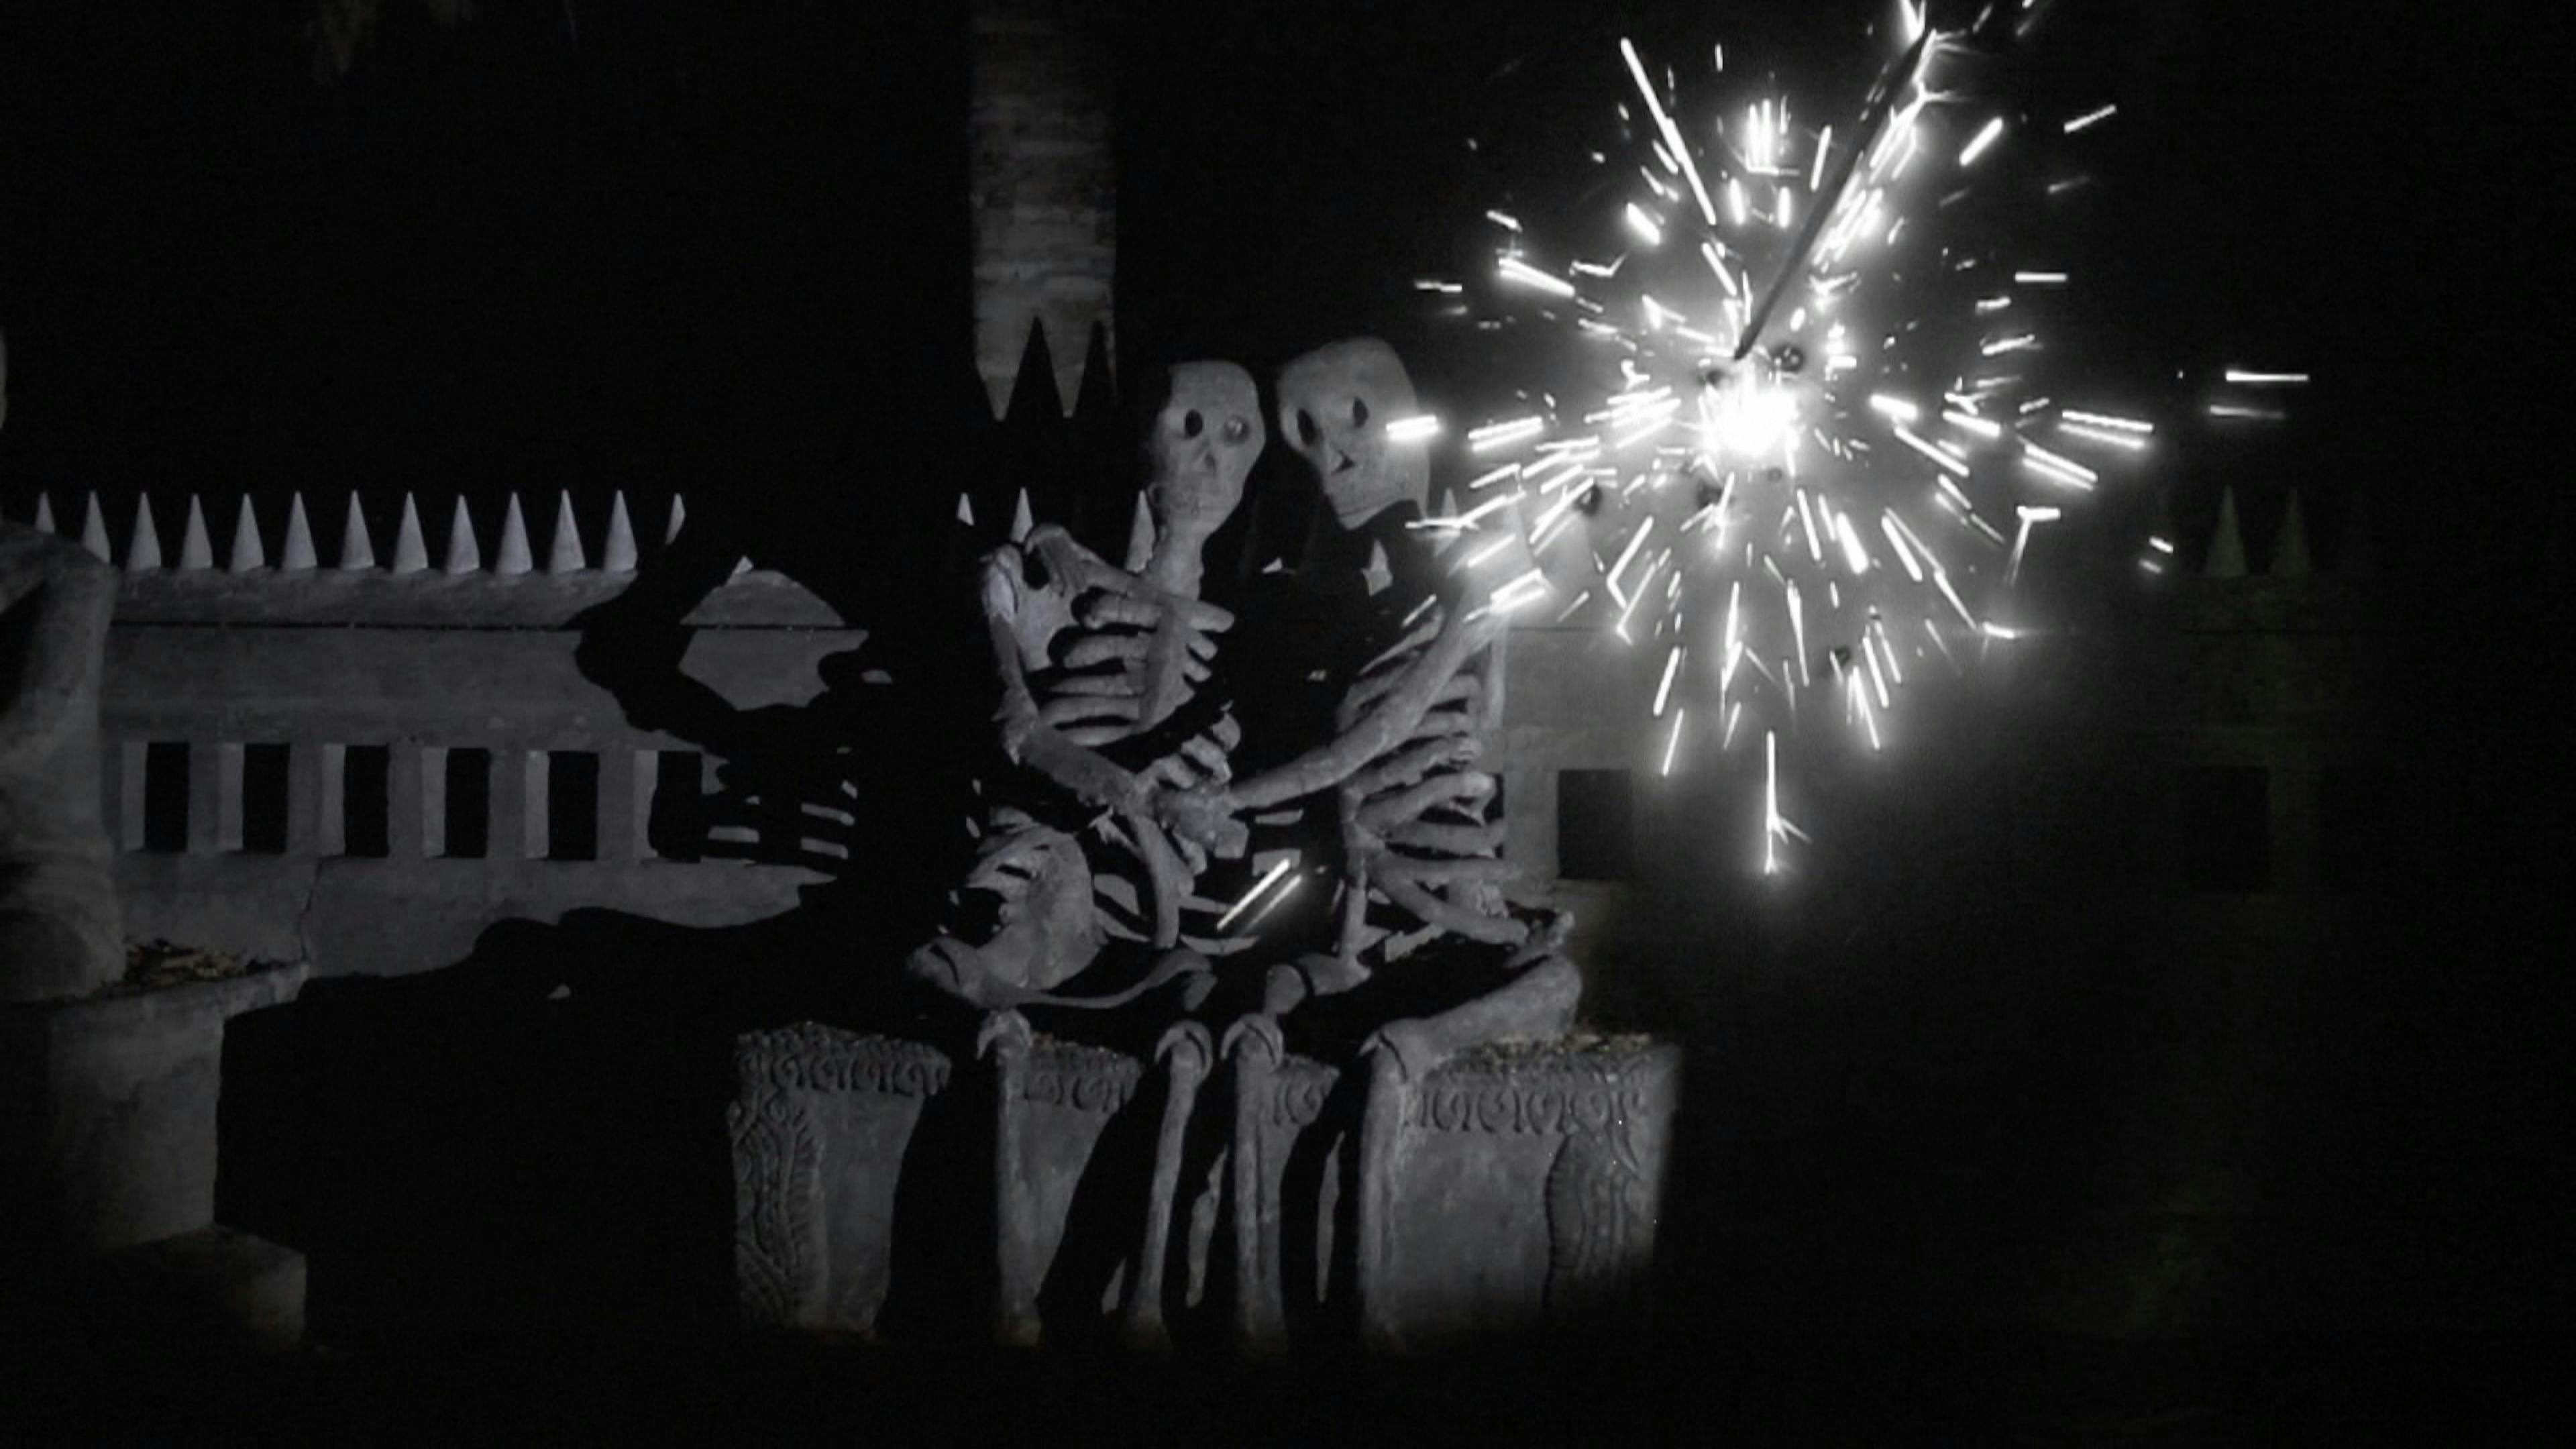 A black and white image of two skeletons are sitting on a stone bench embracing. There is a firework exploding next to them.